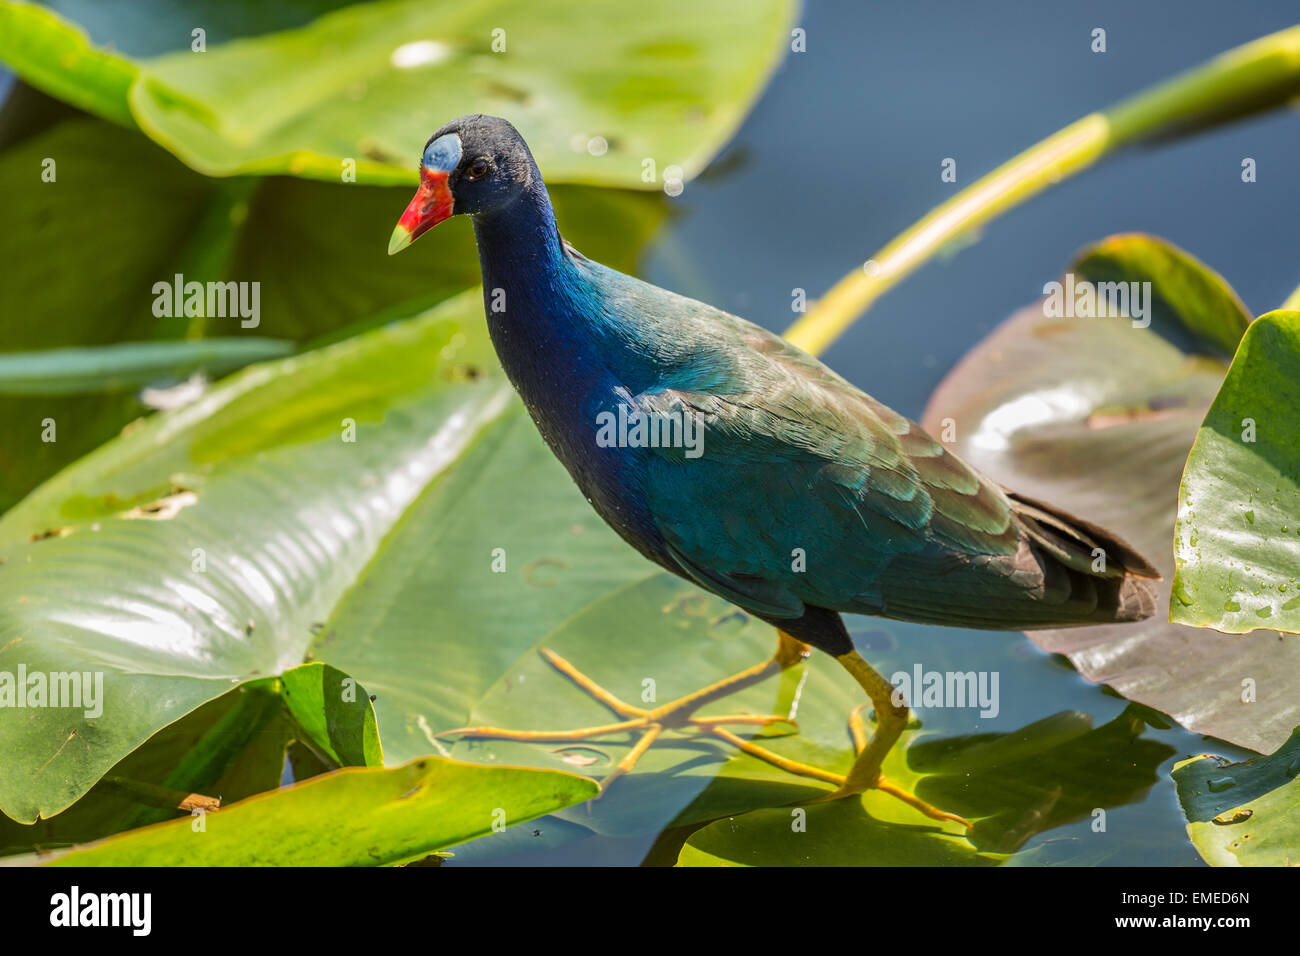 Purple gallinule (Porphyrio martinicus) at the Royal Palm visitor center in the Florida Everglades National Park. Stock Photo